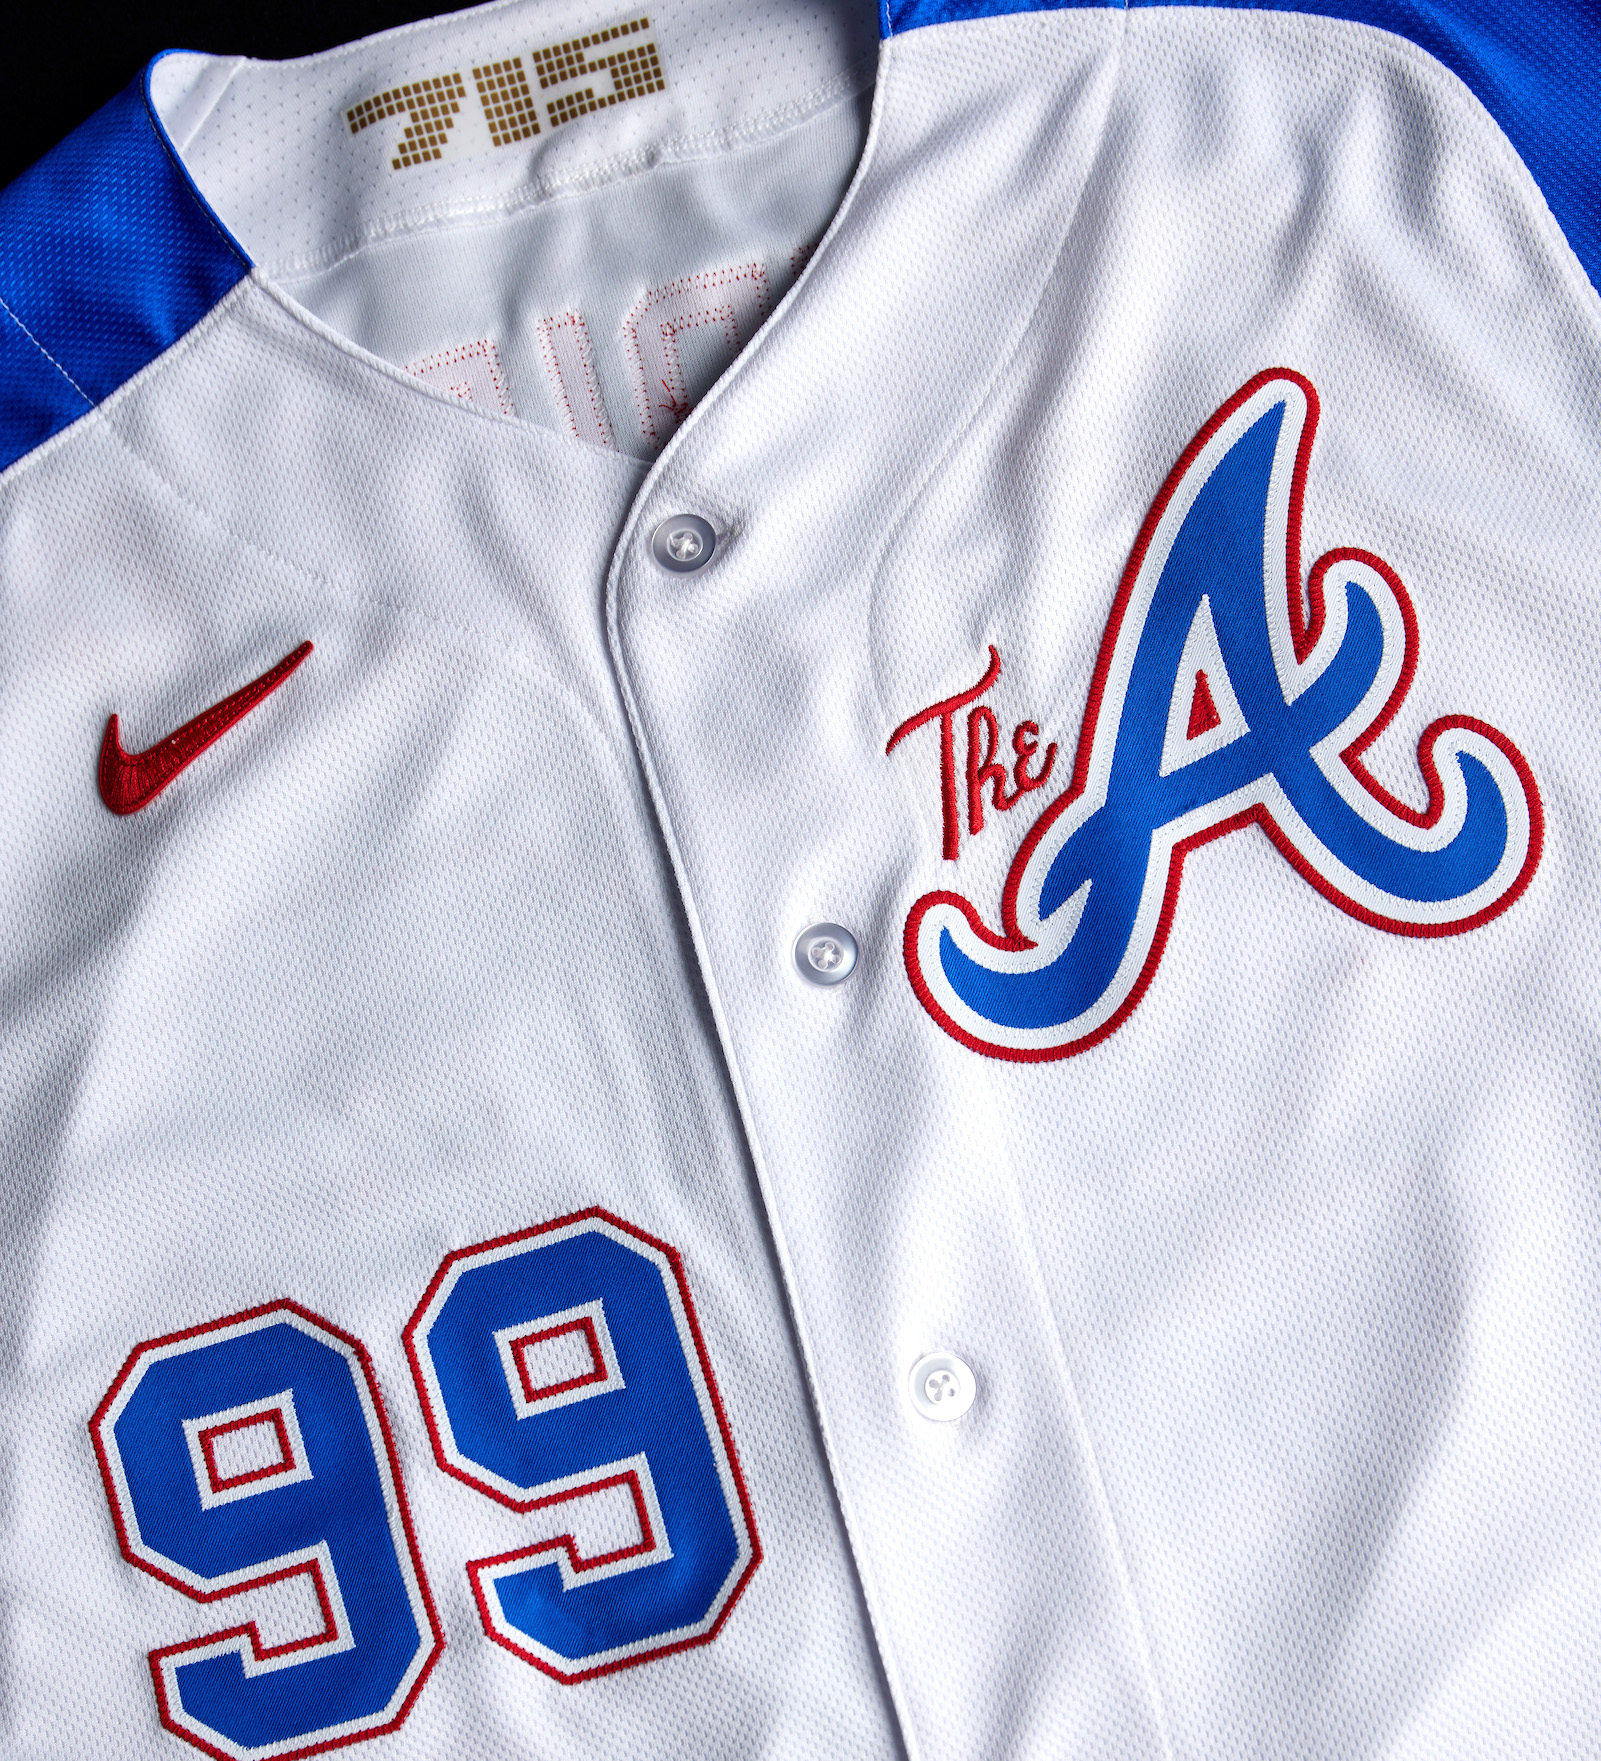 Braves will unveil 'refreshed' uniforms at Chop Fest